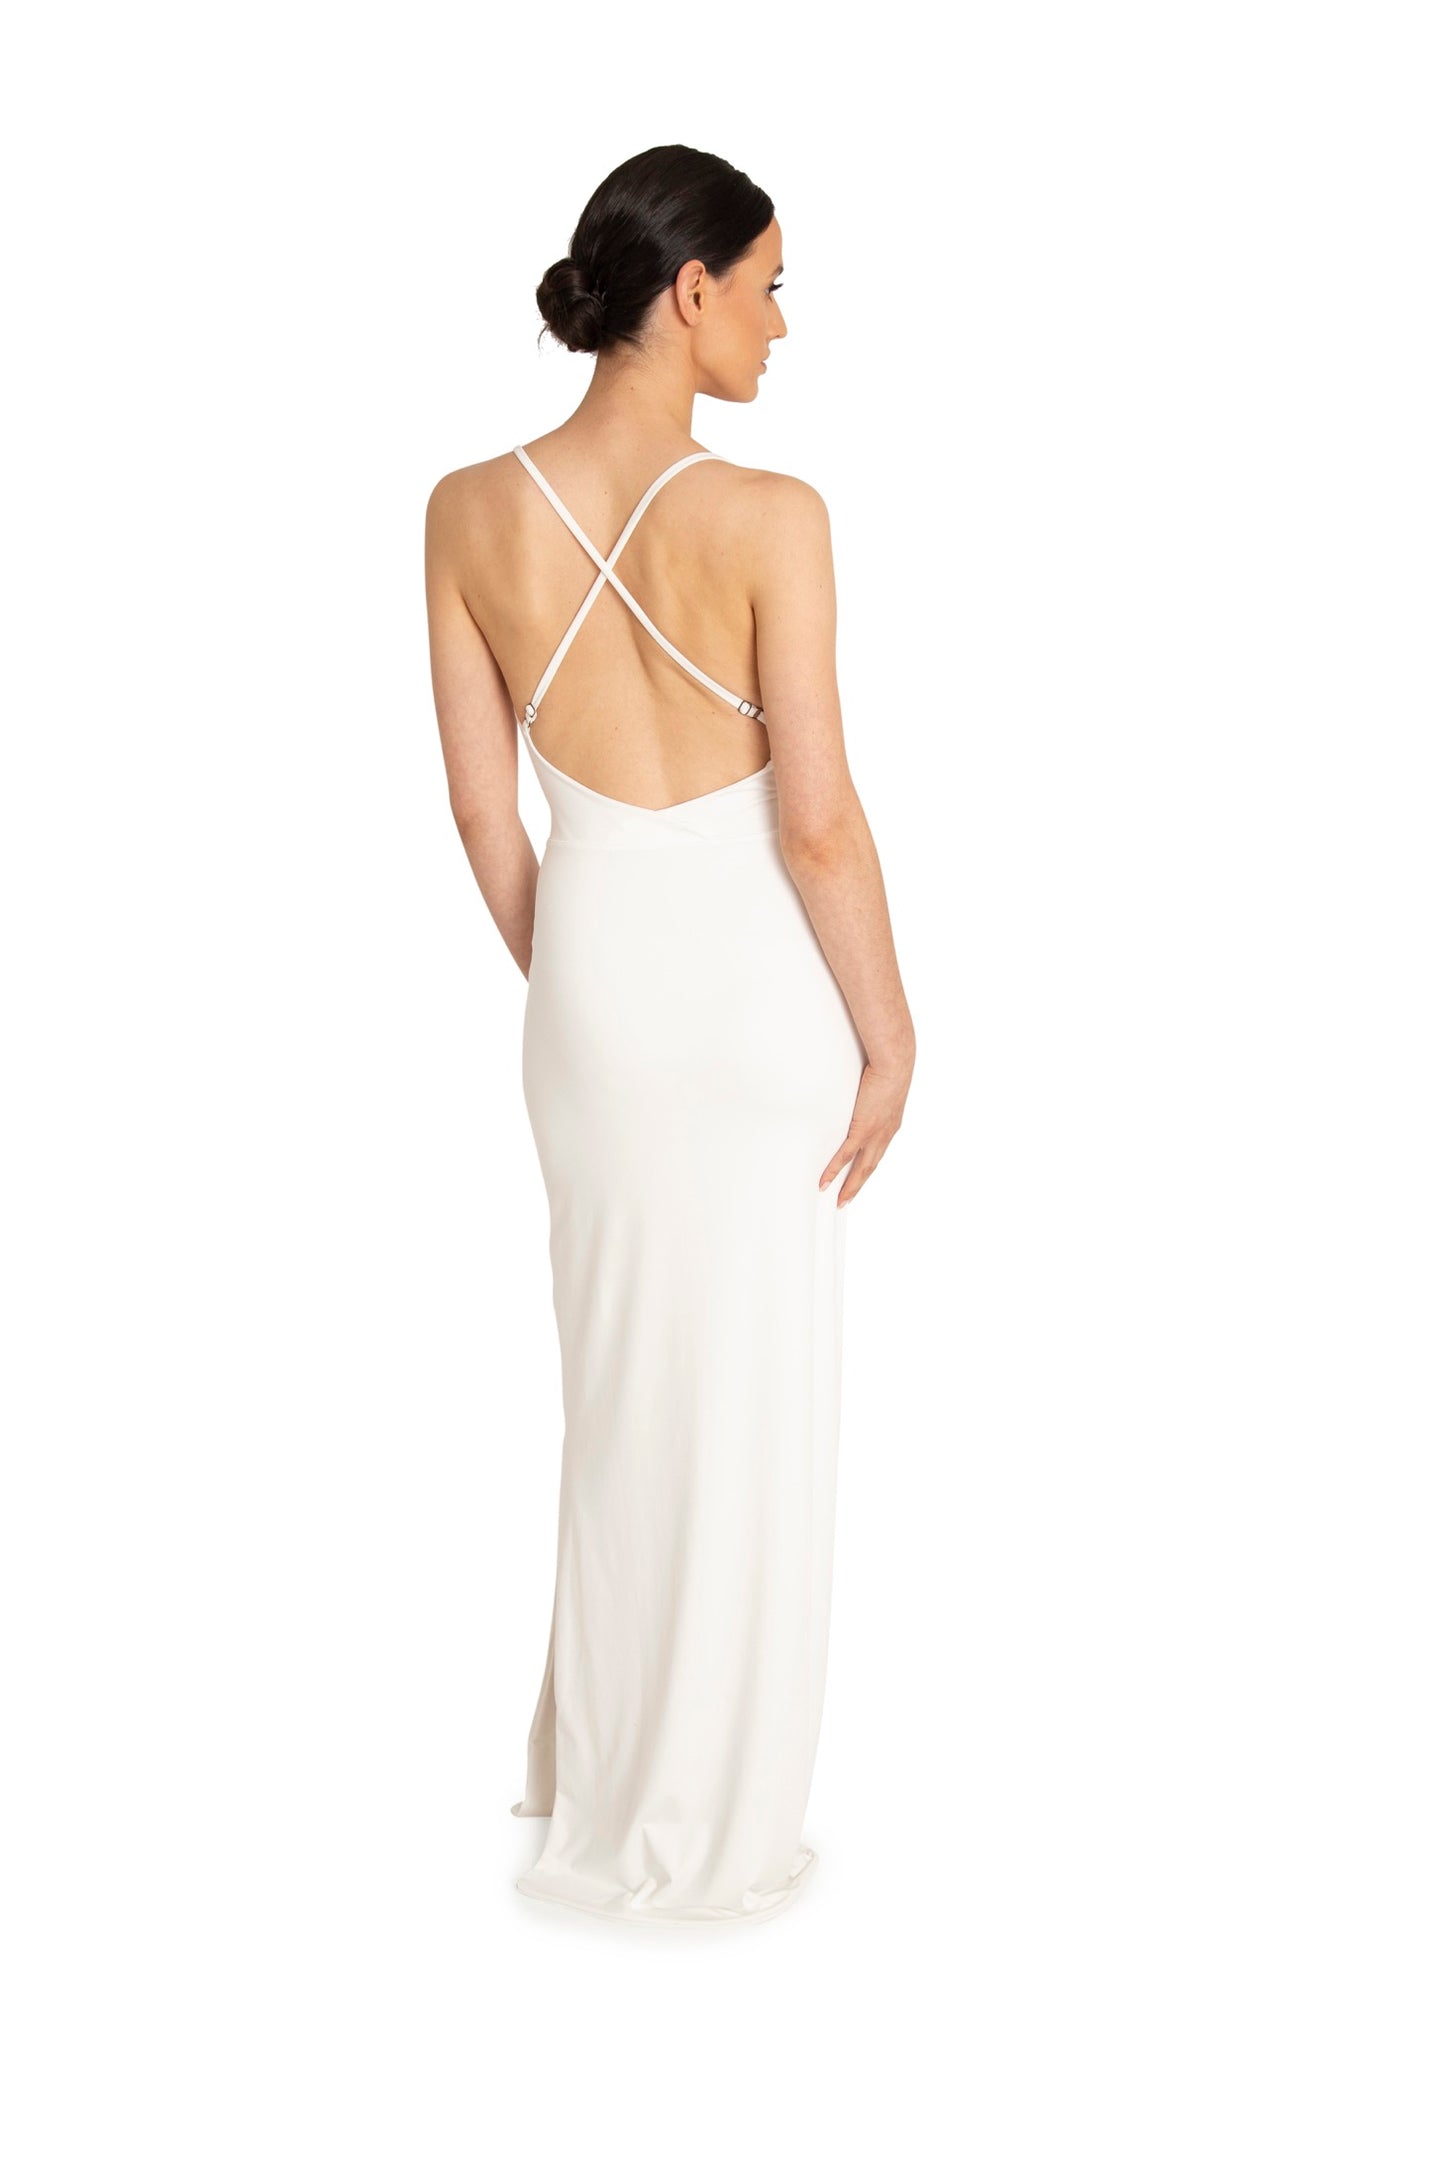 THE MORA GOWN (WHITE)